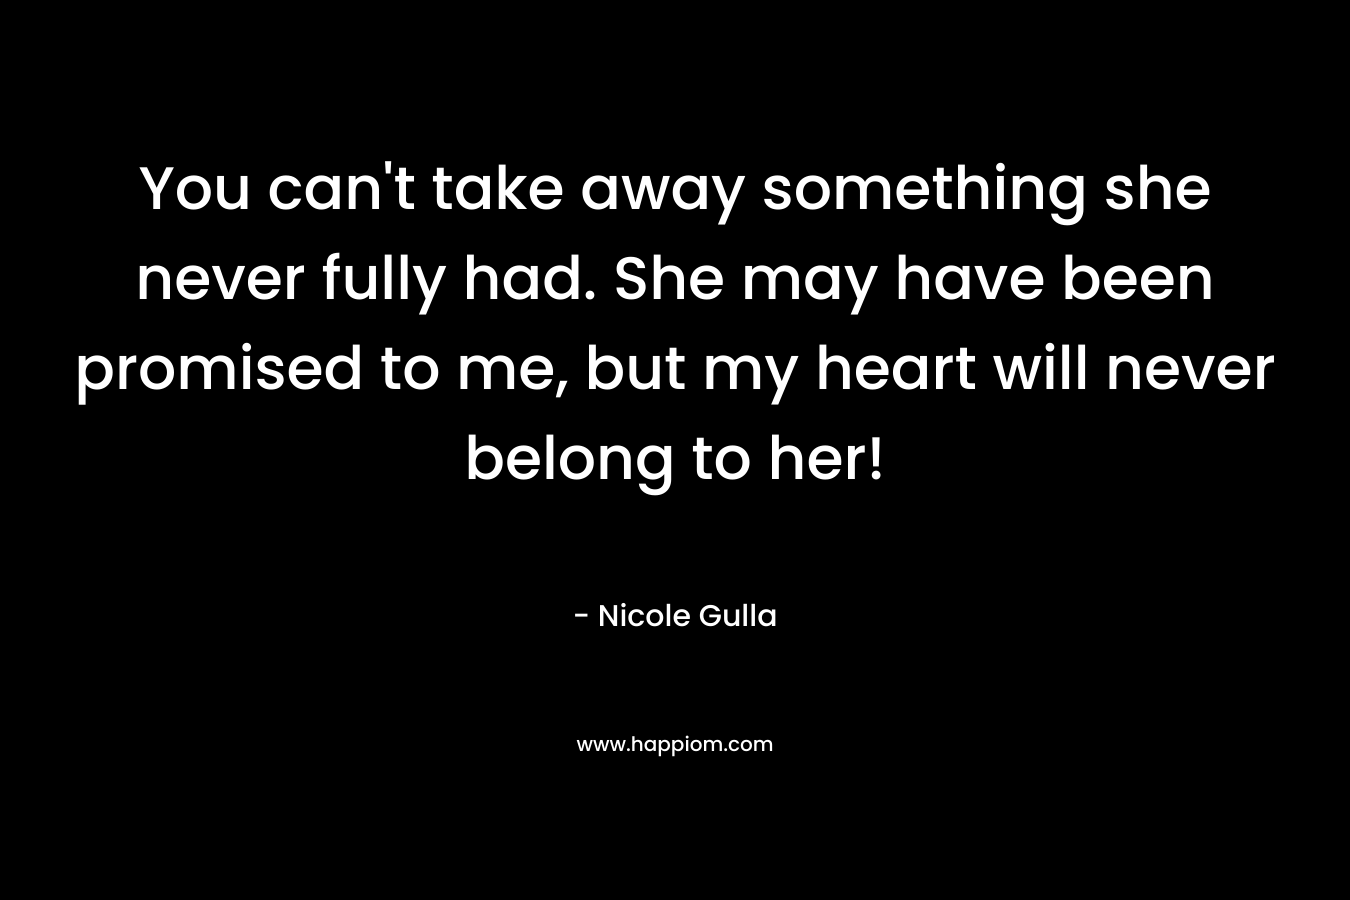 You can't take away something she never fully had. She may have been promised to me, but my heart will never belong to her!